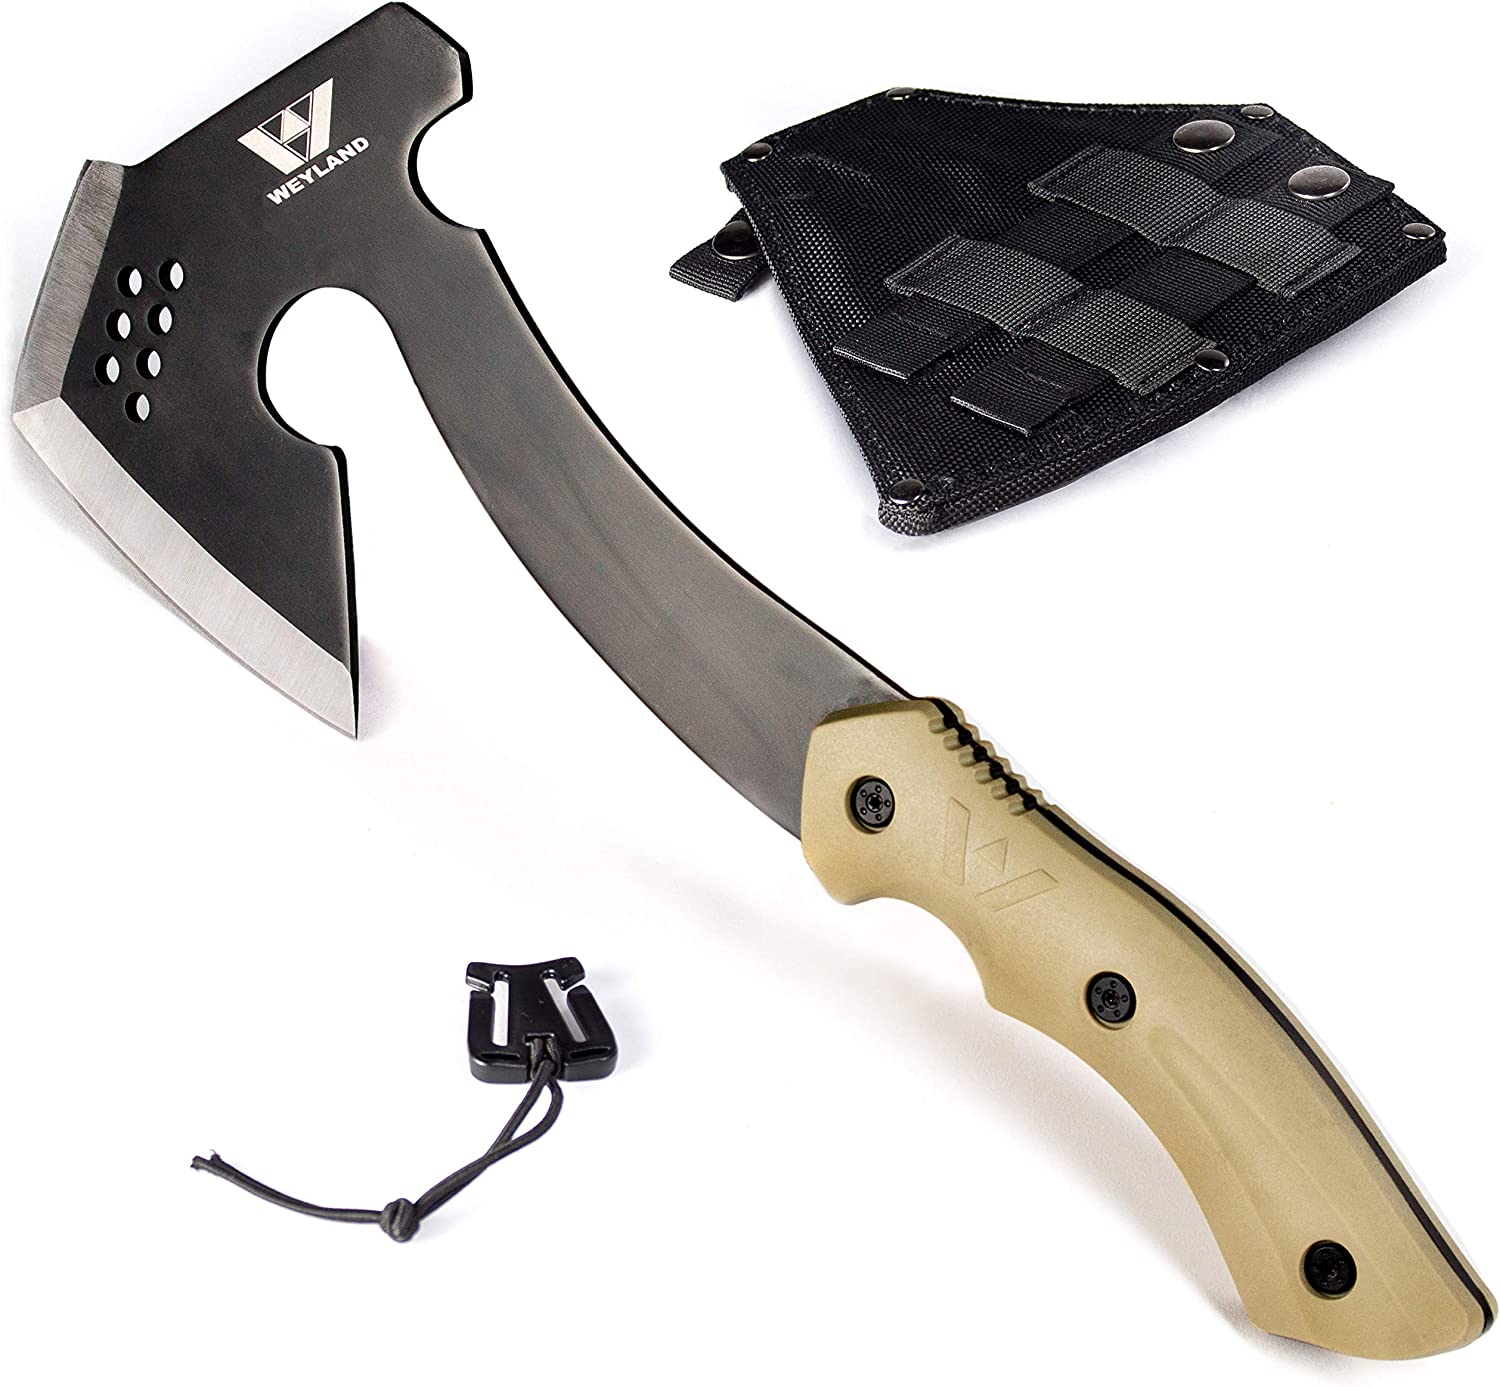 WEYLAND Survival Hatchet & Camping Axe with MOLLE Sheath – Small Tactical Bushcraft Camping Axes & Hatchets for Splitting & Chopping Wood, Kindling Splitter for fire, Throwing Tomahawk, Camp Hand Tool